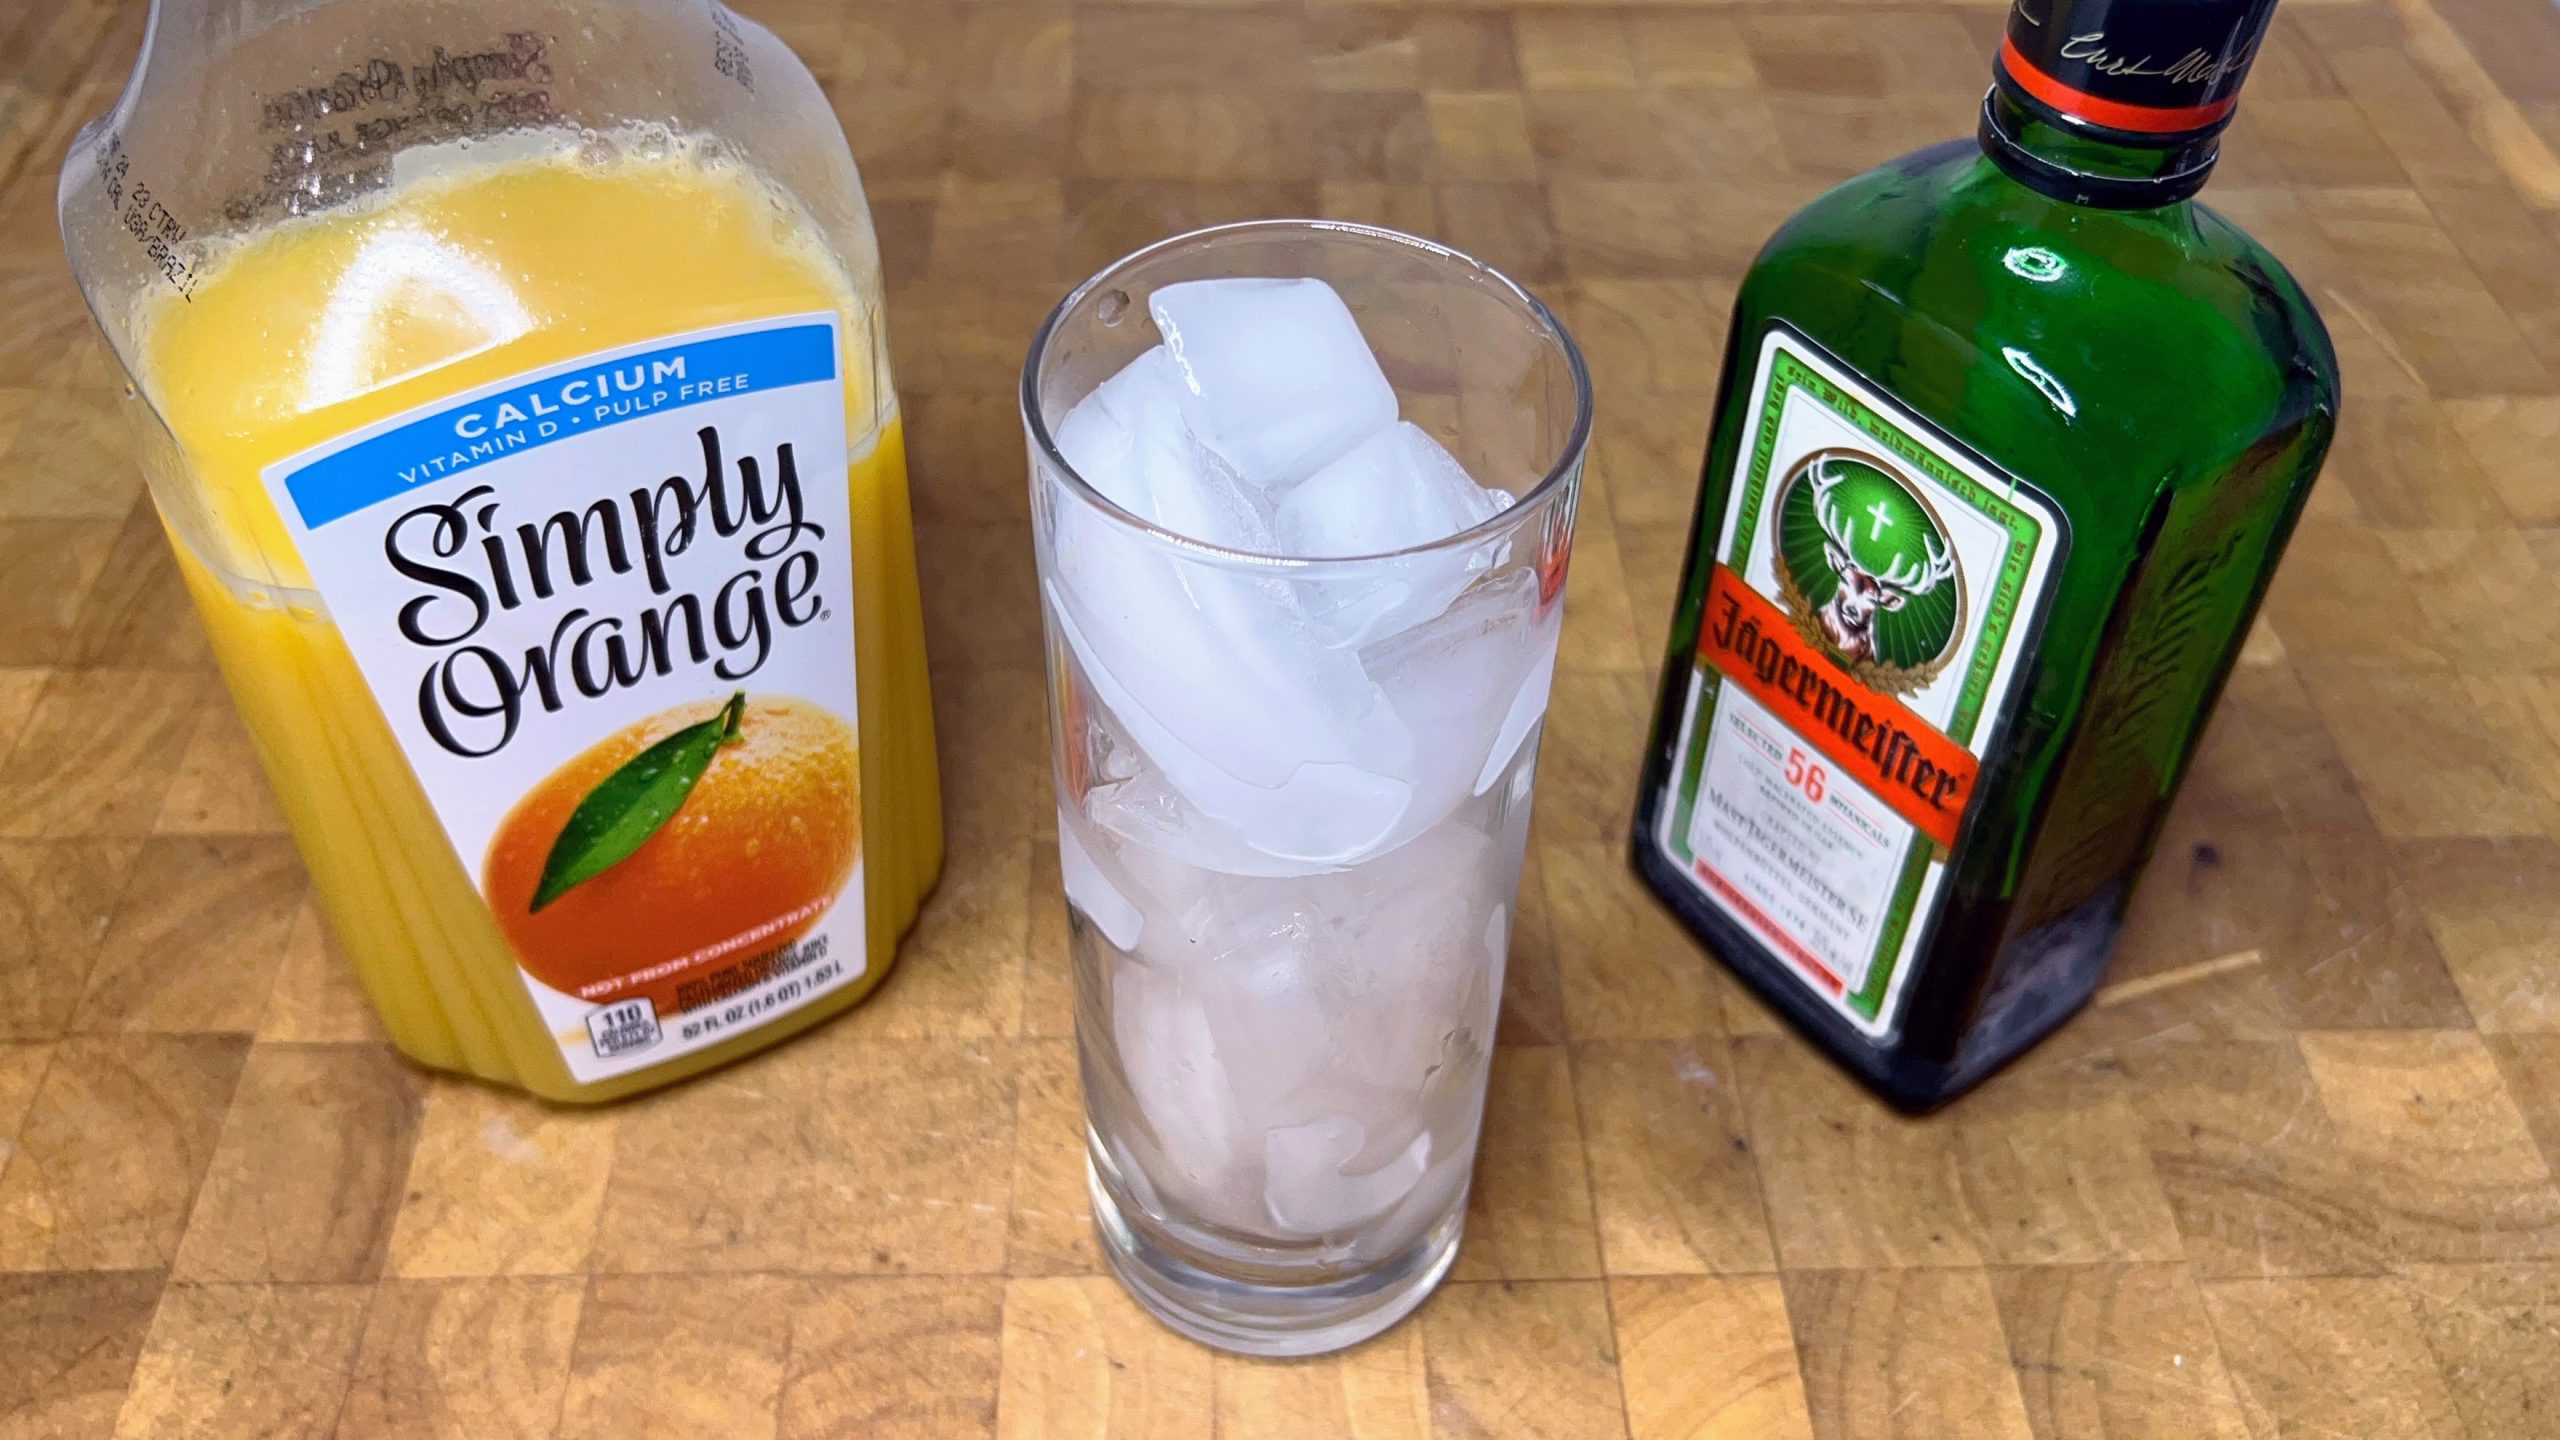 highball glass filled with ice with bottles of orange juice and jager next to the glass